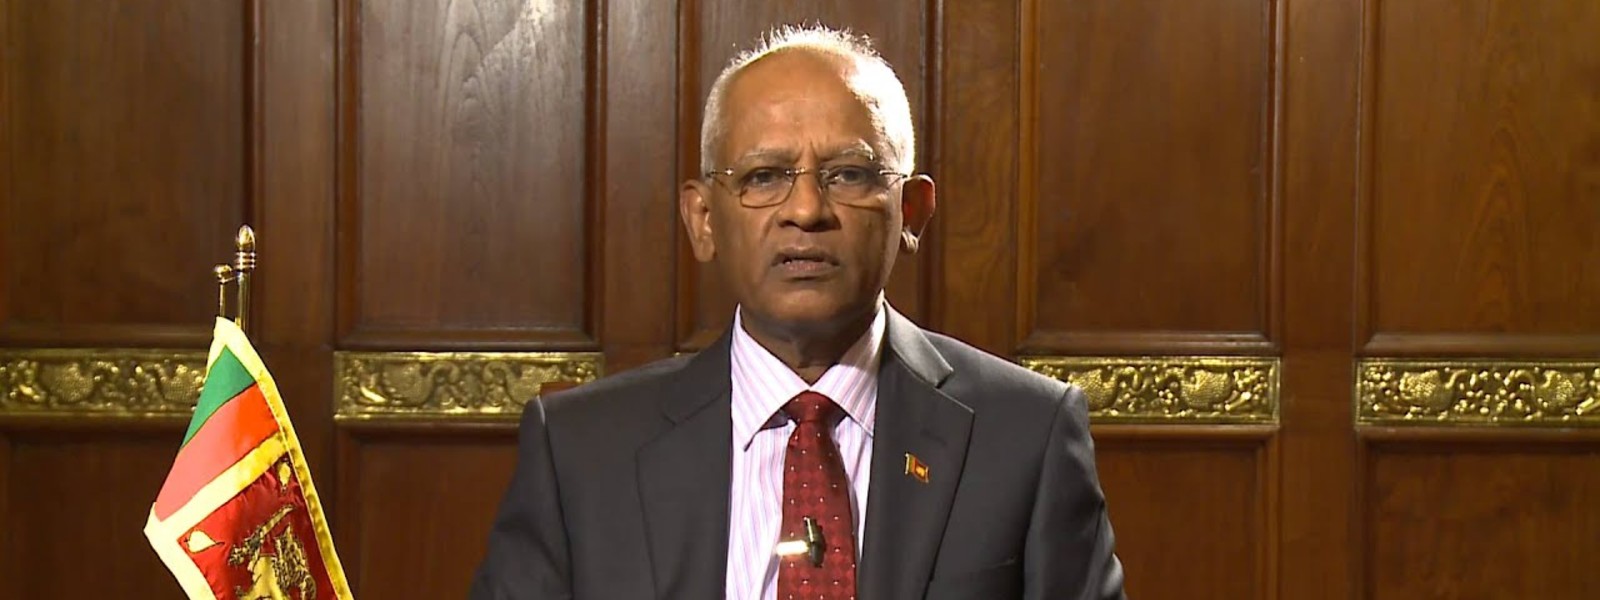 15 million Sri Lankans to be vaccinated by 31st December – Lalith Weeratunga